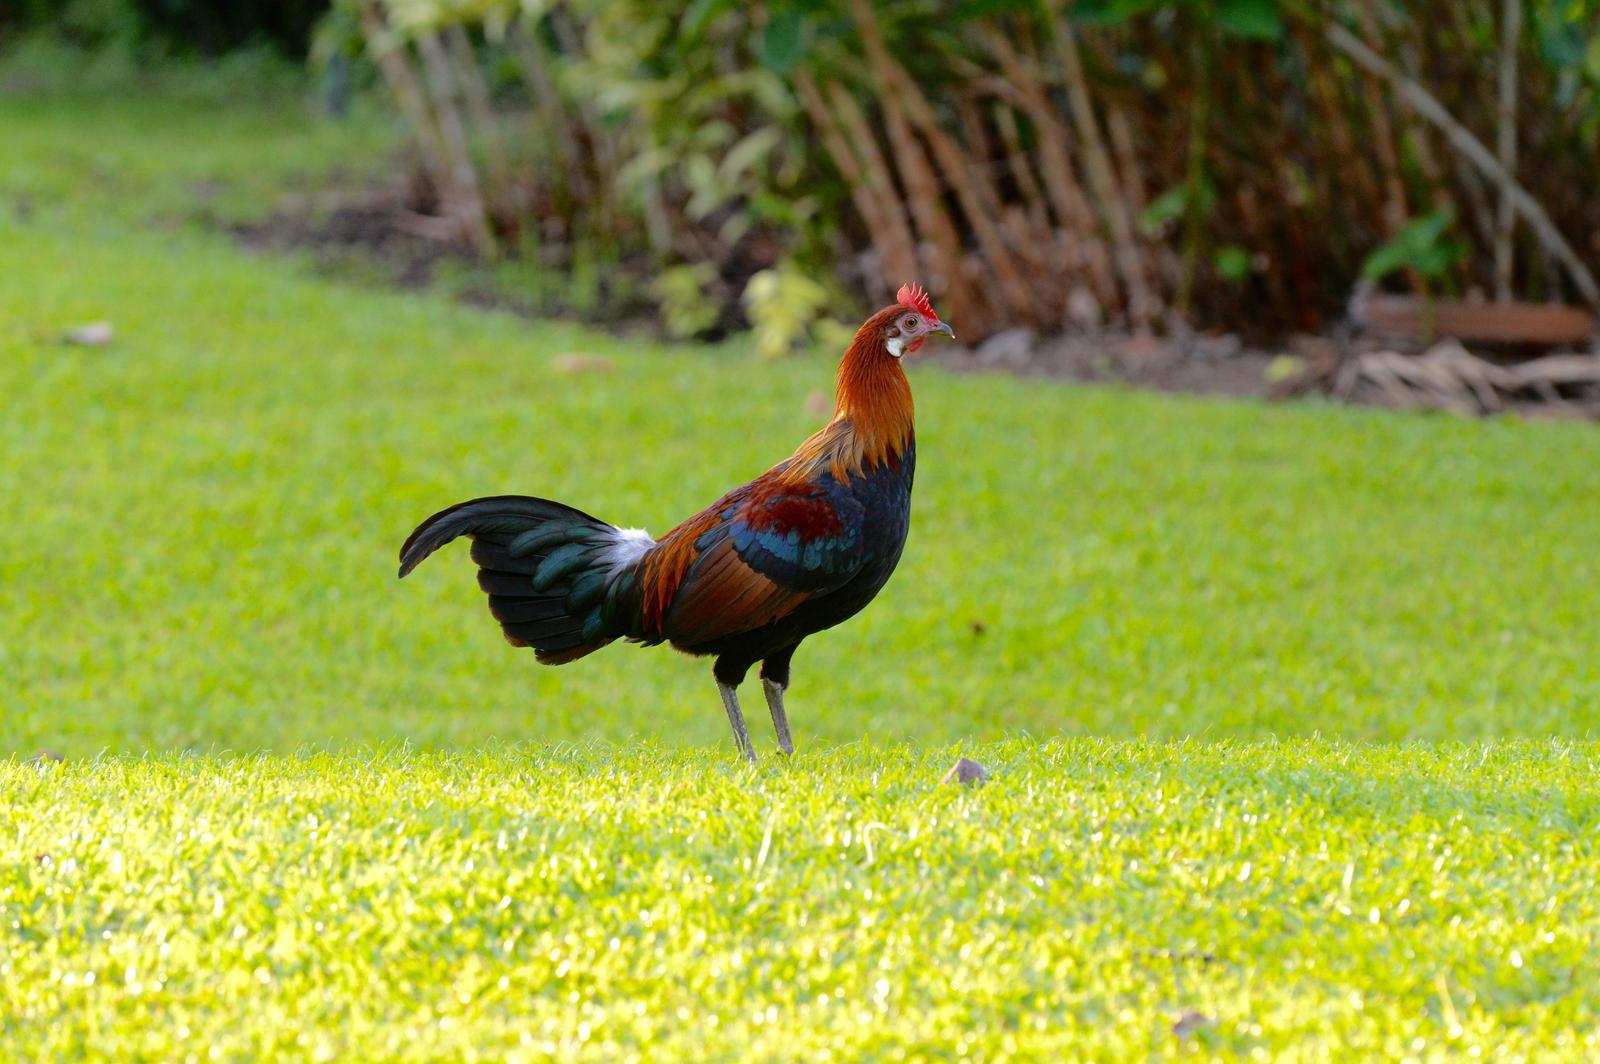 Red Junglefowl Photo by marcel finlay